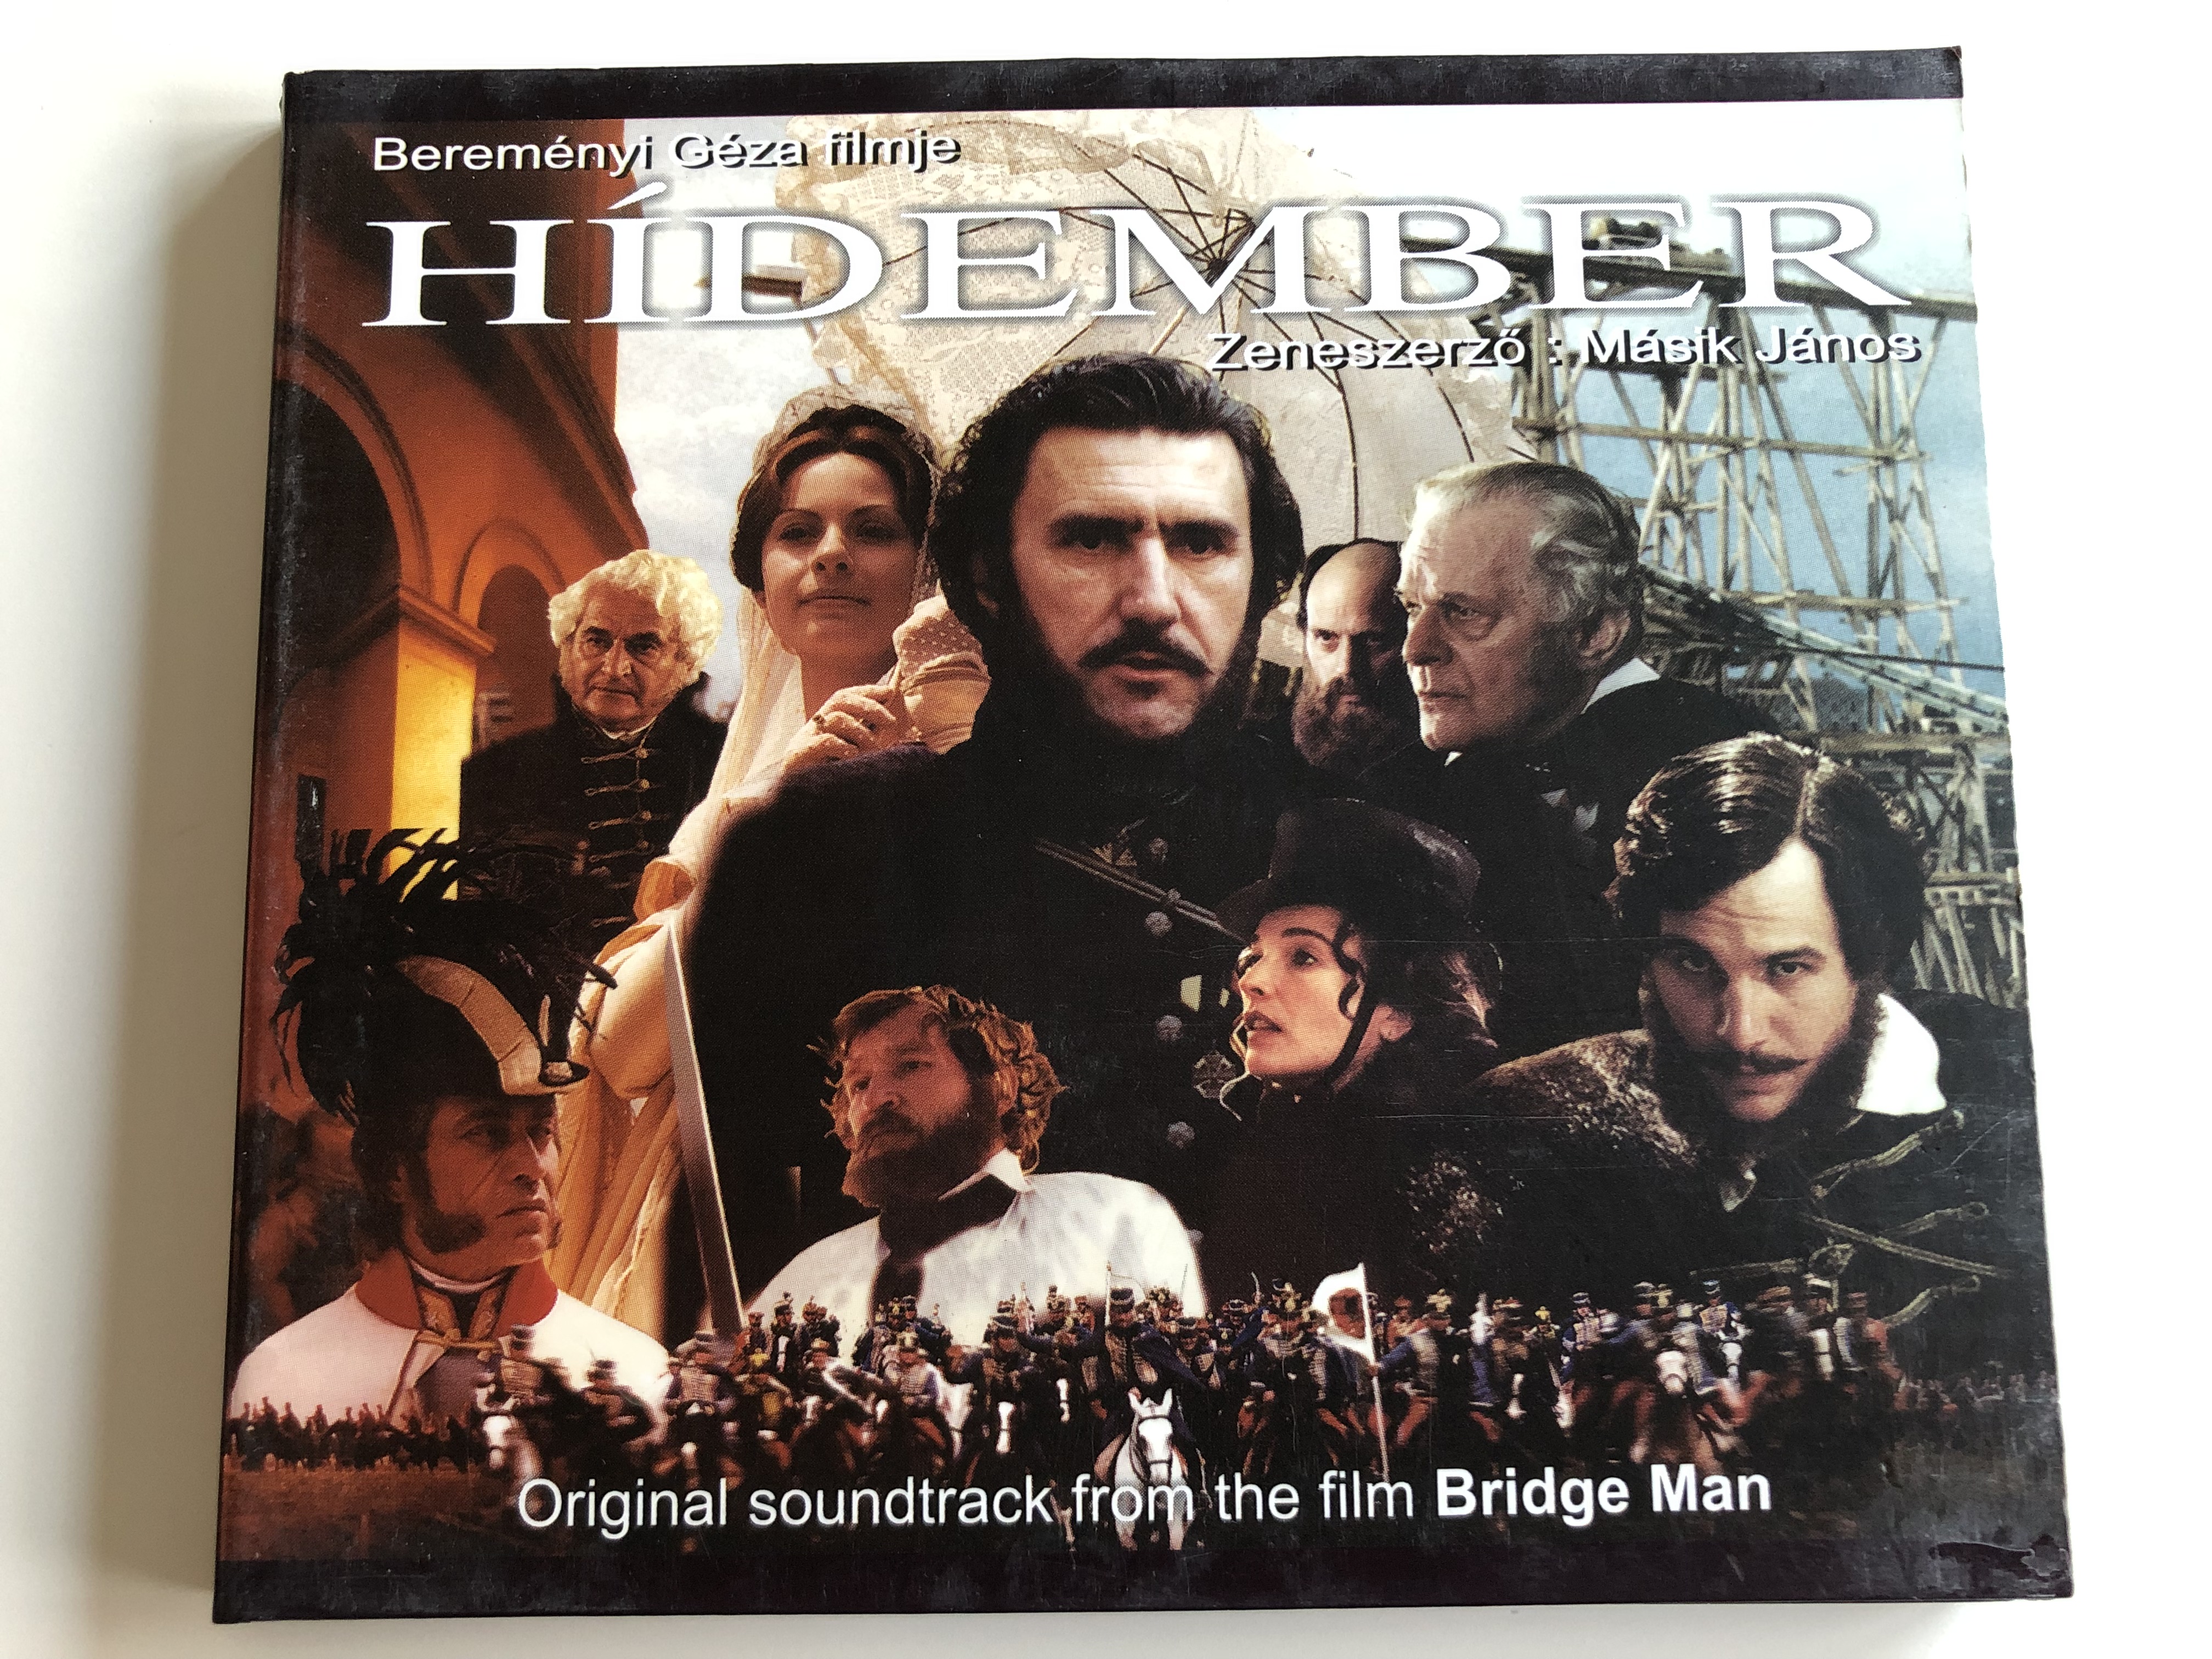 h-dember-ost-original-sound-track-from-the-film-bridge-man-composed-by-m-sik-j-nos-audio-cd-2002-fon-records-1-.jpg